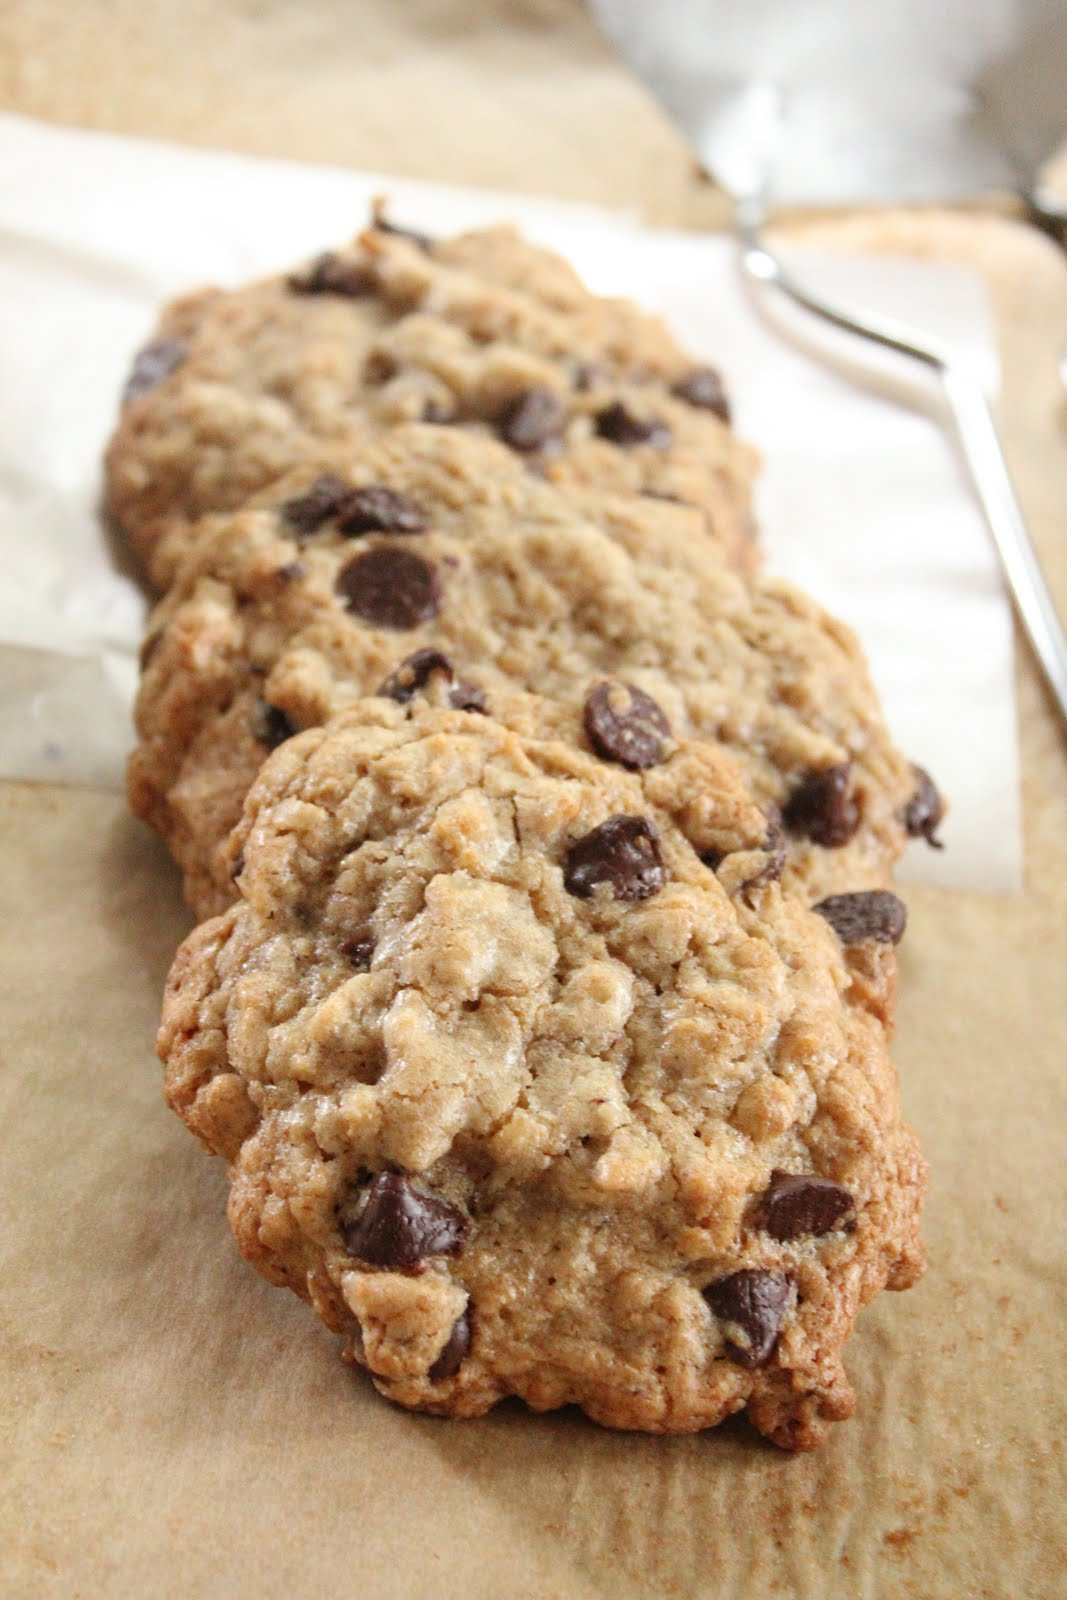 Cocoa Oatmeal Cookies Healthy
 Ultimate healthier oatmeal and chocolate chip cookies